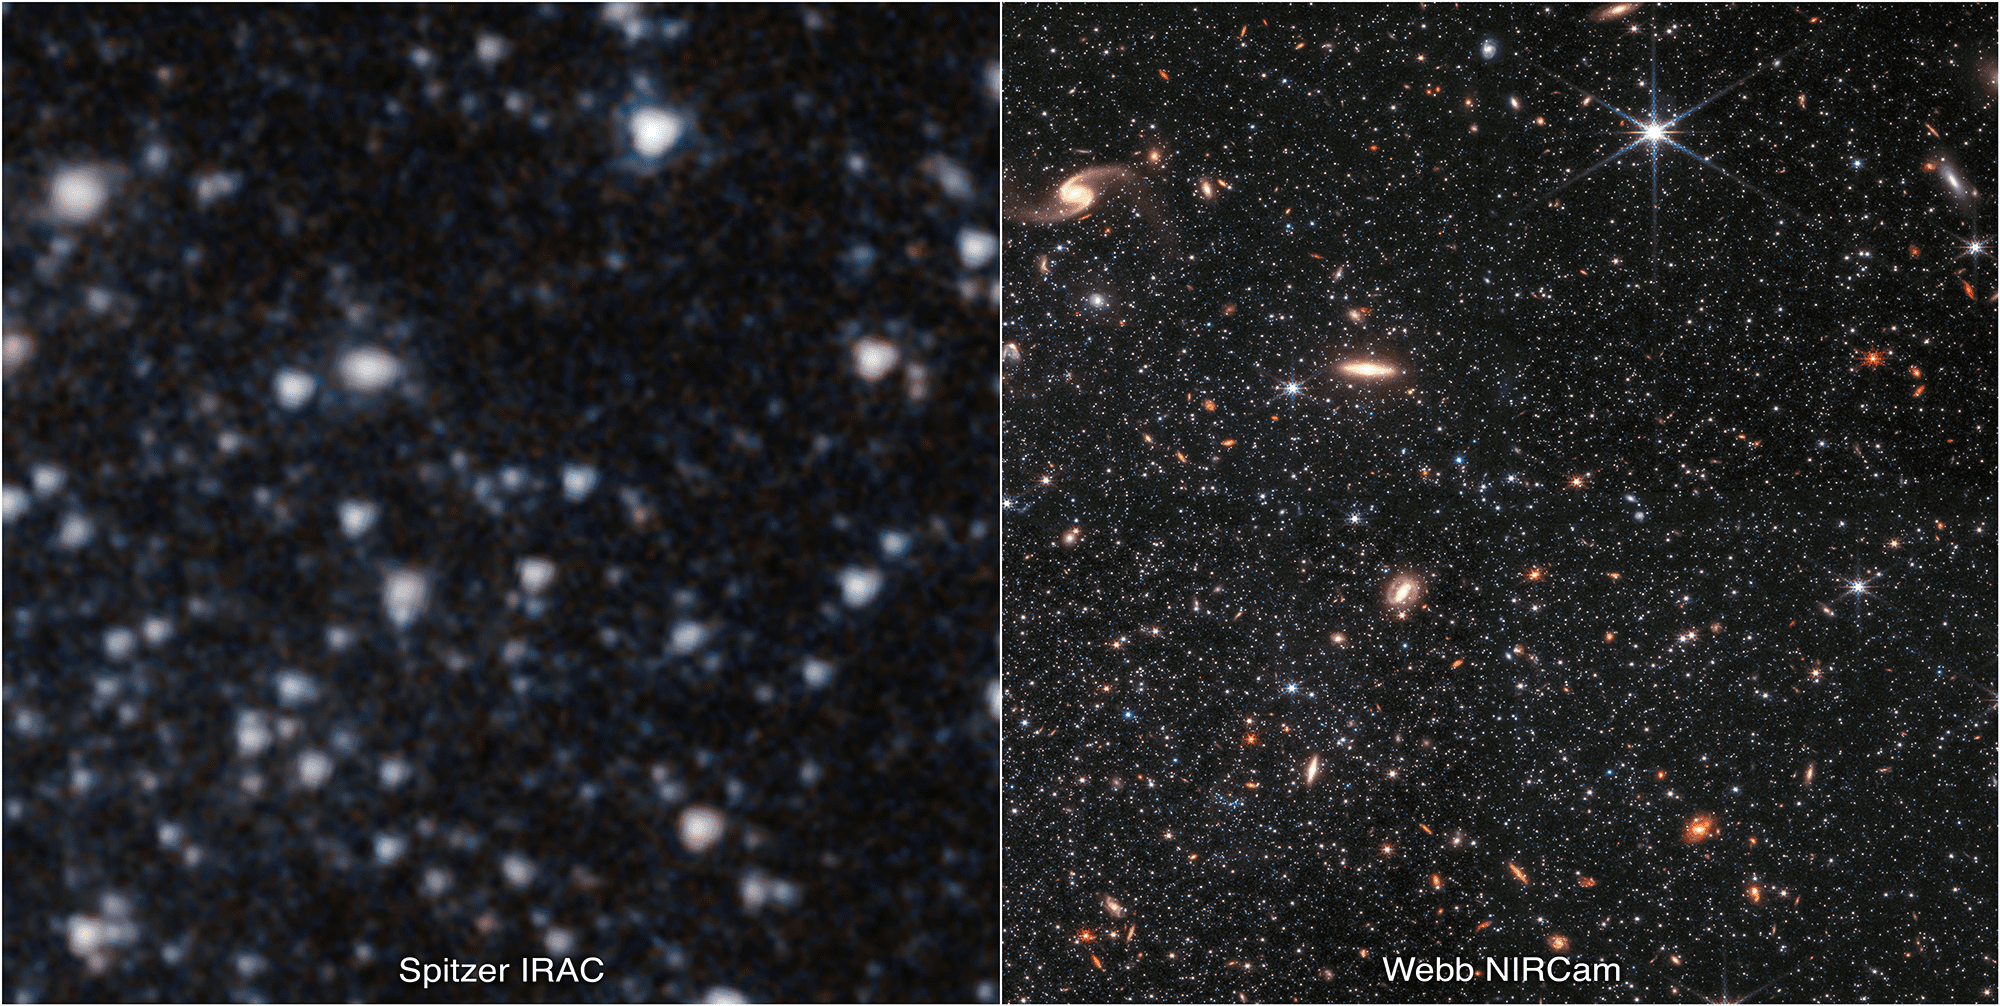 On the left the image from spitzer looks unfocused and while individuals onjects are visible their edges are not well defined. The JWST image on the right is instead perfectly clear